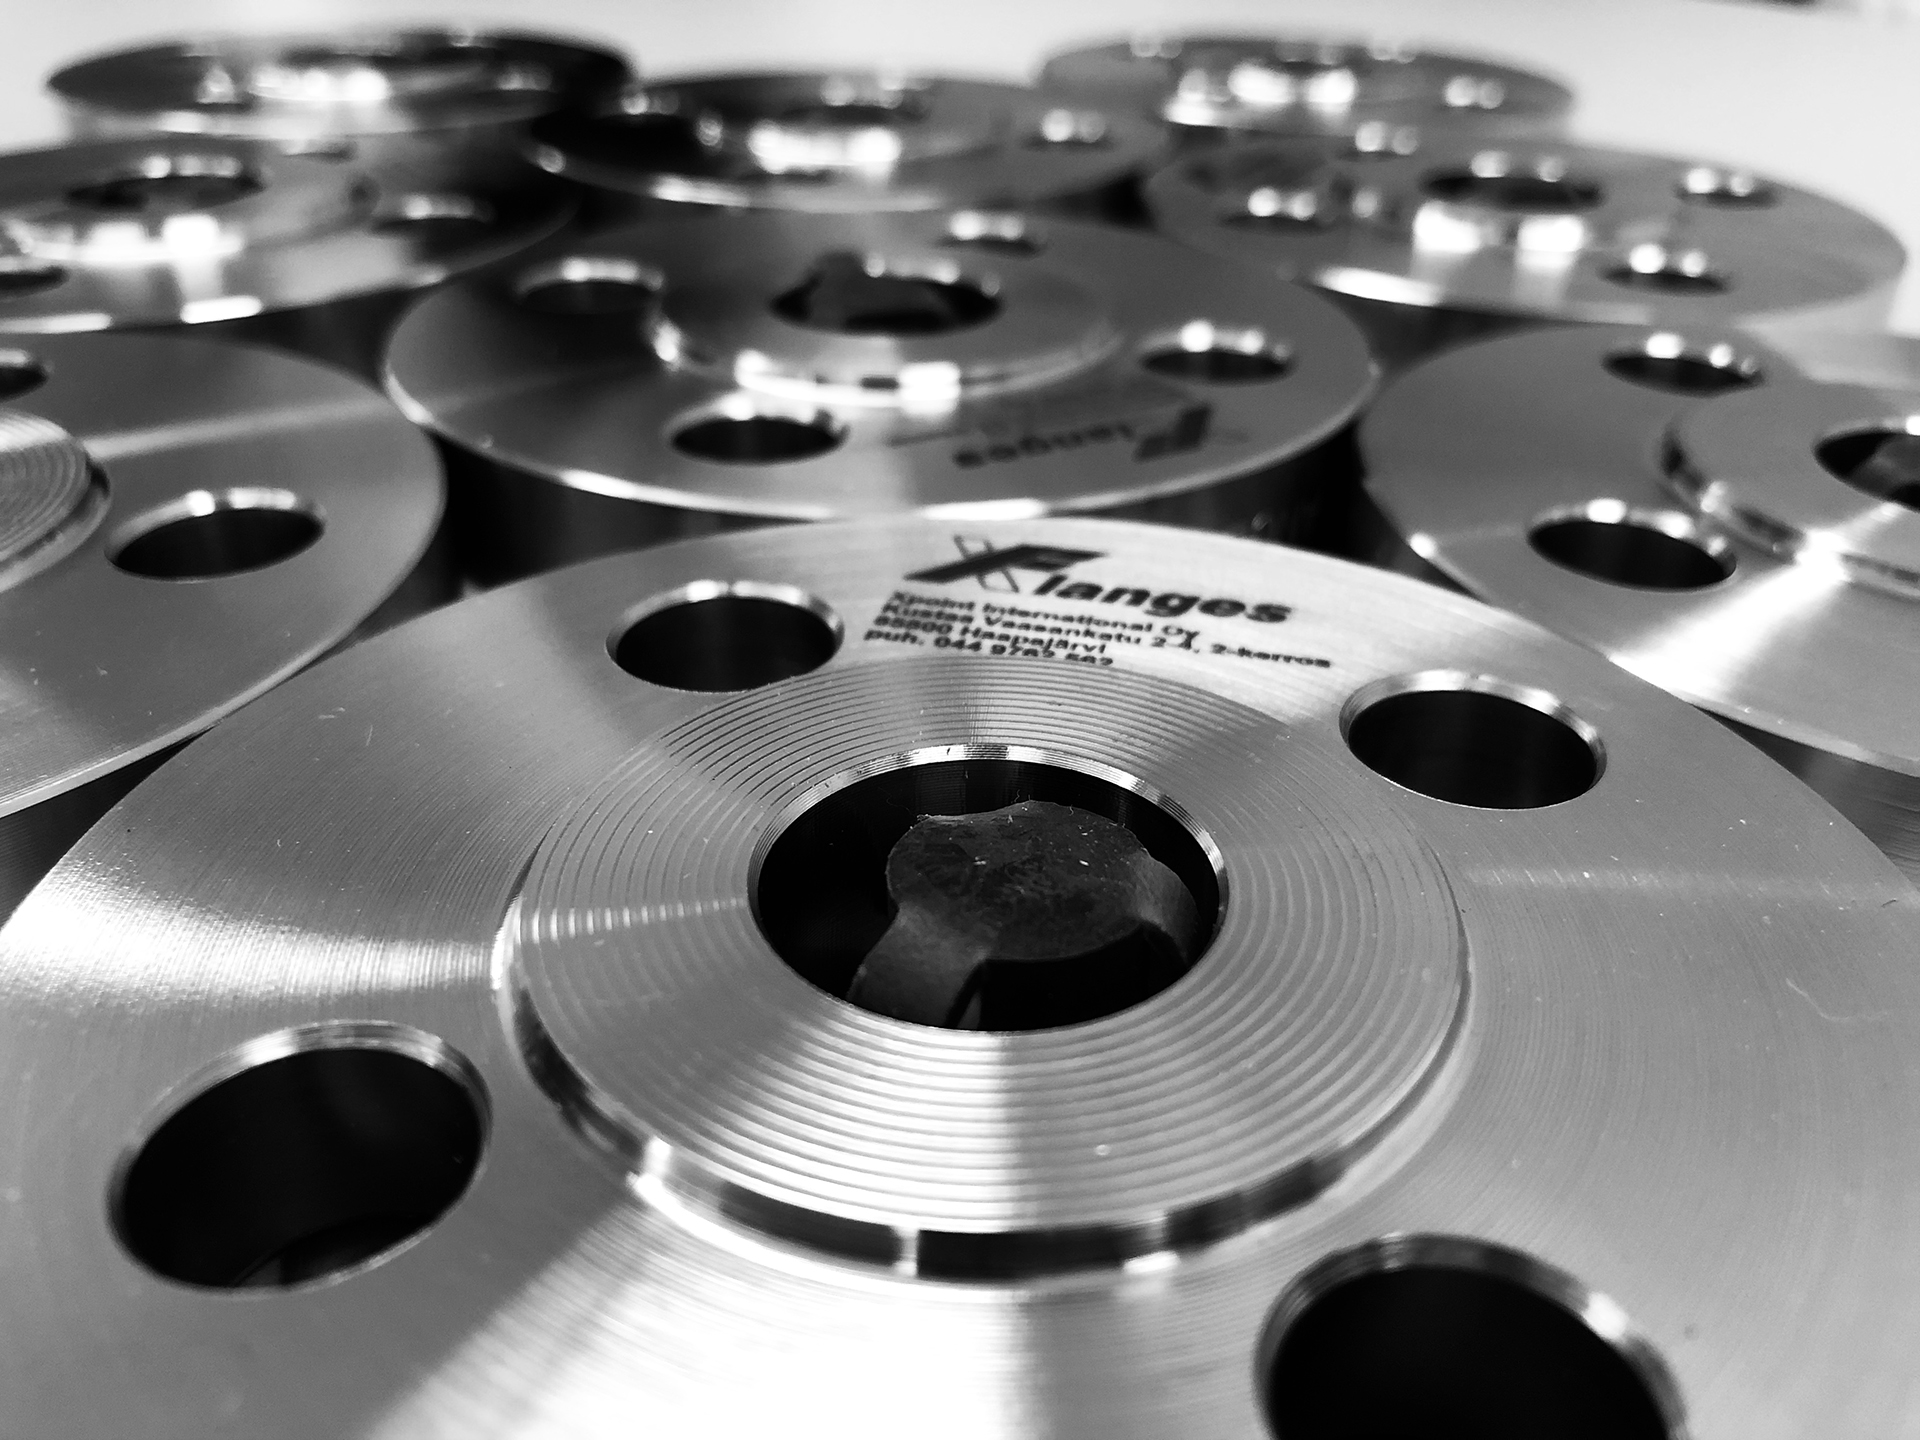 Xpoint will purchase top quality flanges directly from our suppliers.